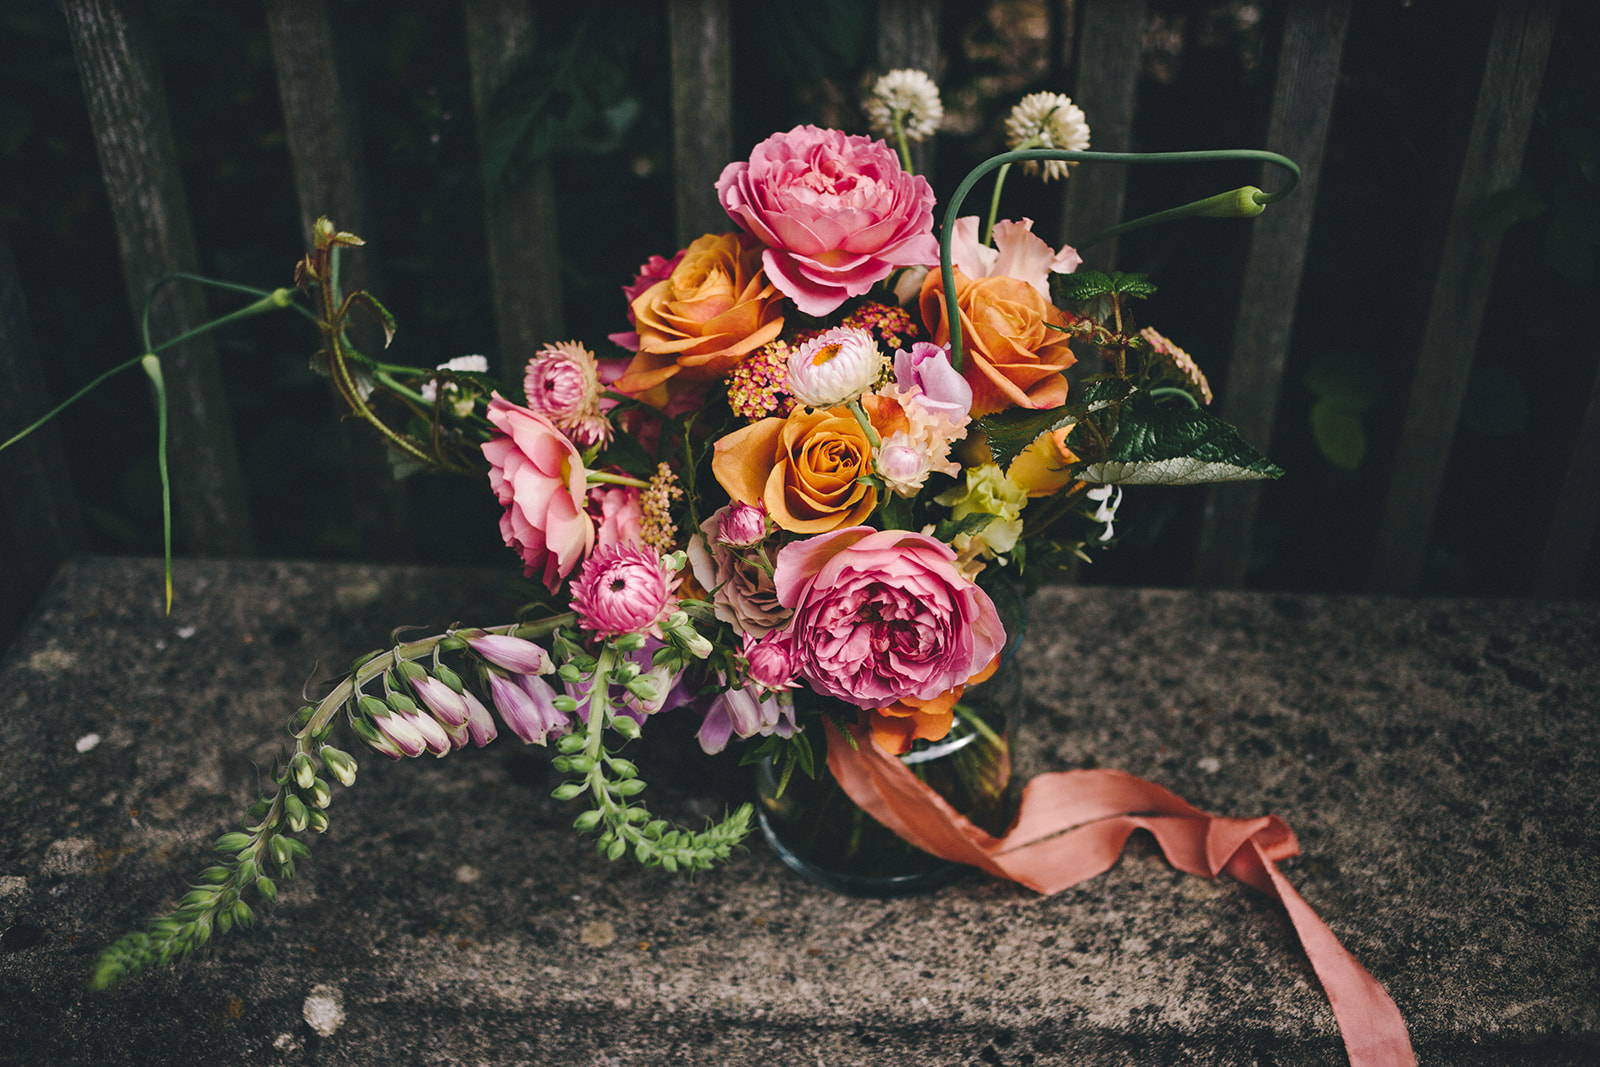 Image shows a wedding bouquet of British-grown wild and ornamental flowers, created by Wildflower Florist in Newcastle and photographed by The Twins.